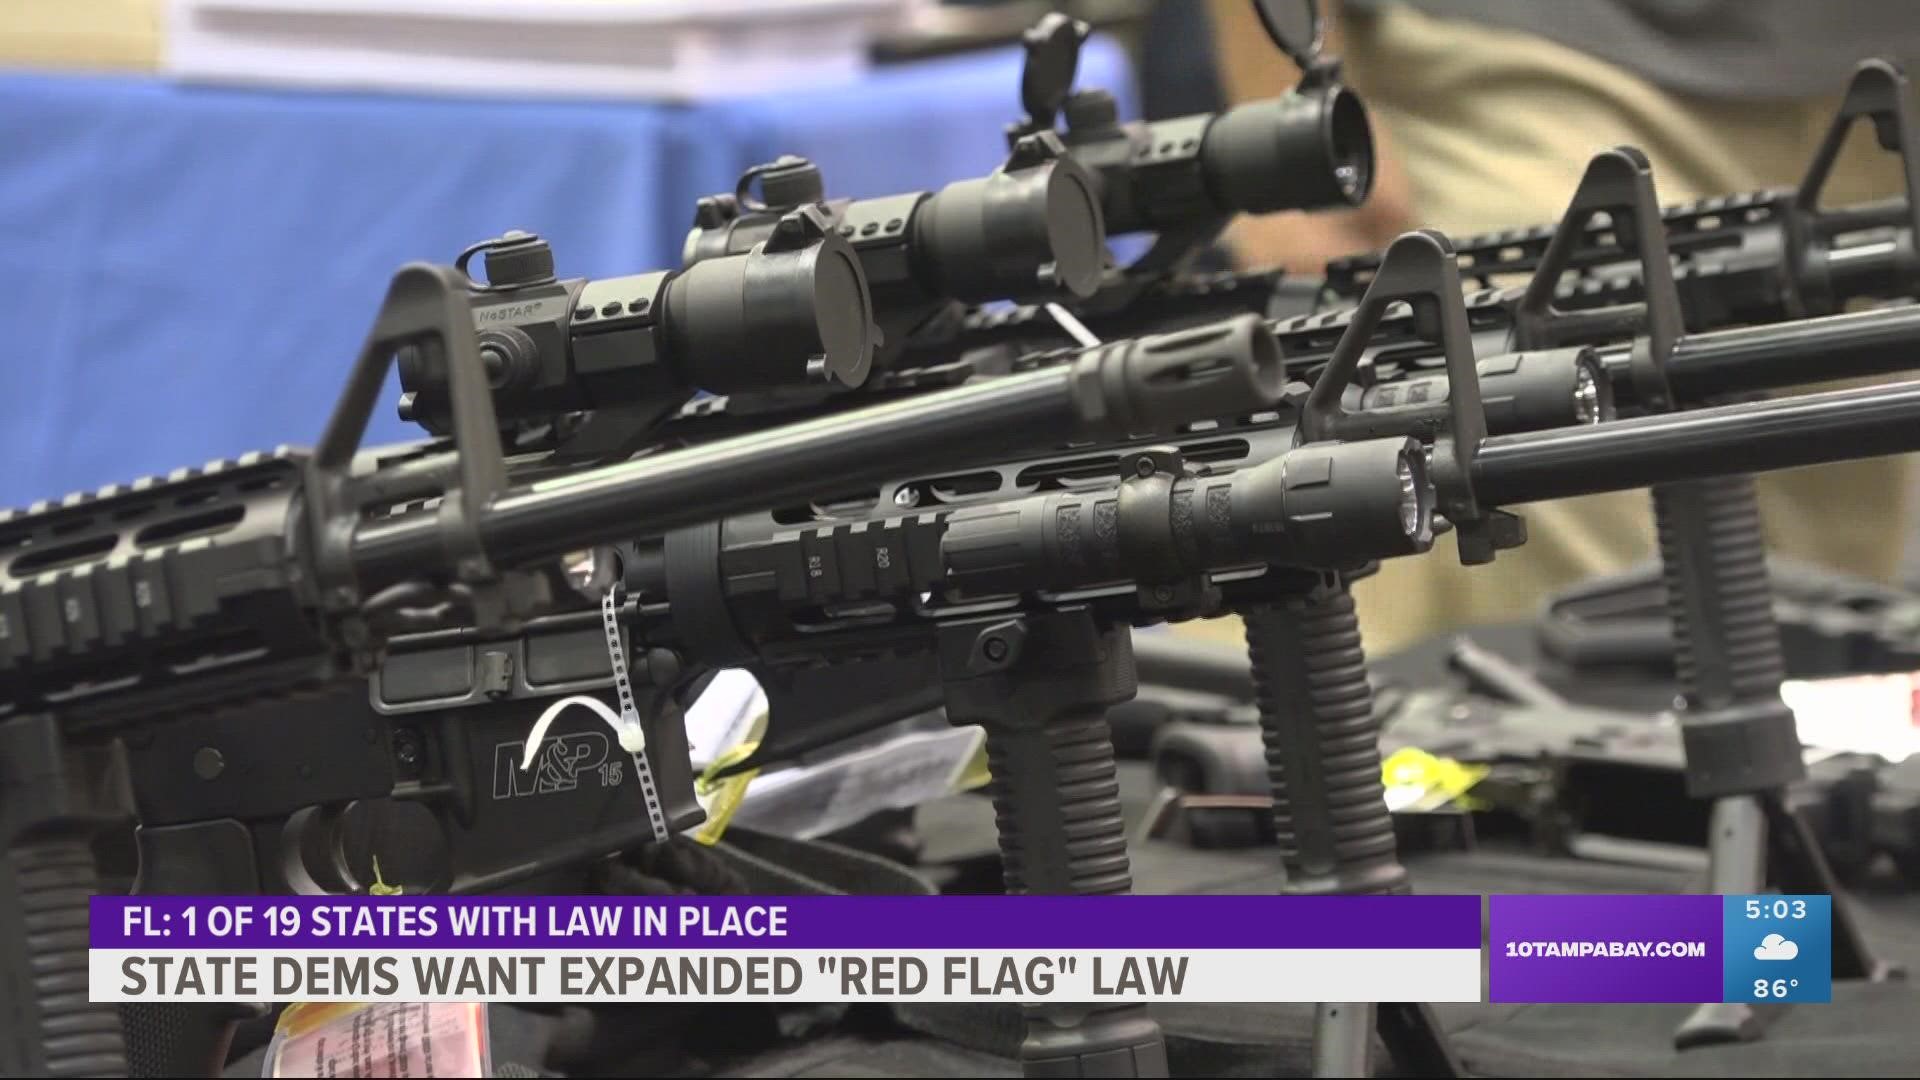 Florida is one of 19 states to have “red flag” gun laws on the books. Democrats want to expand it further.